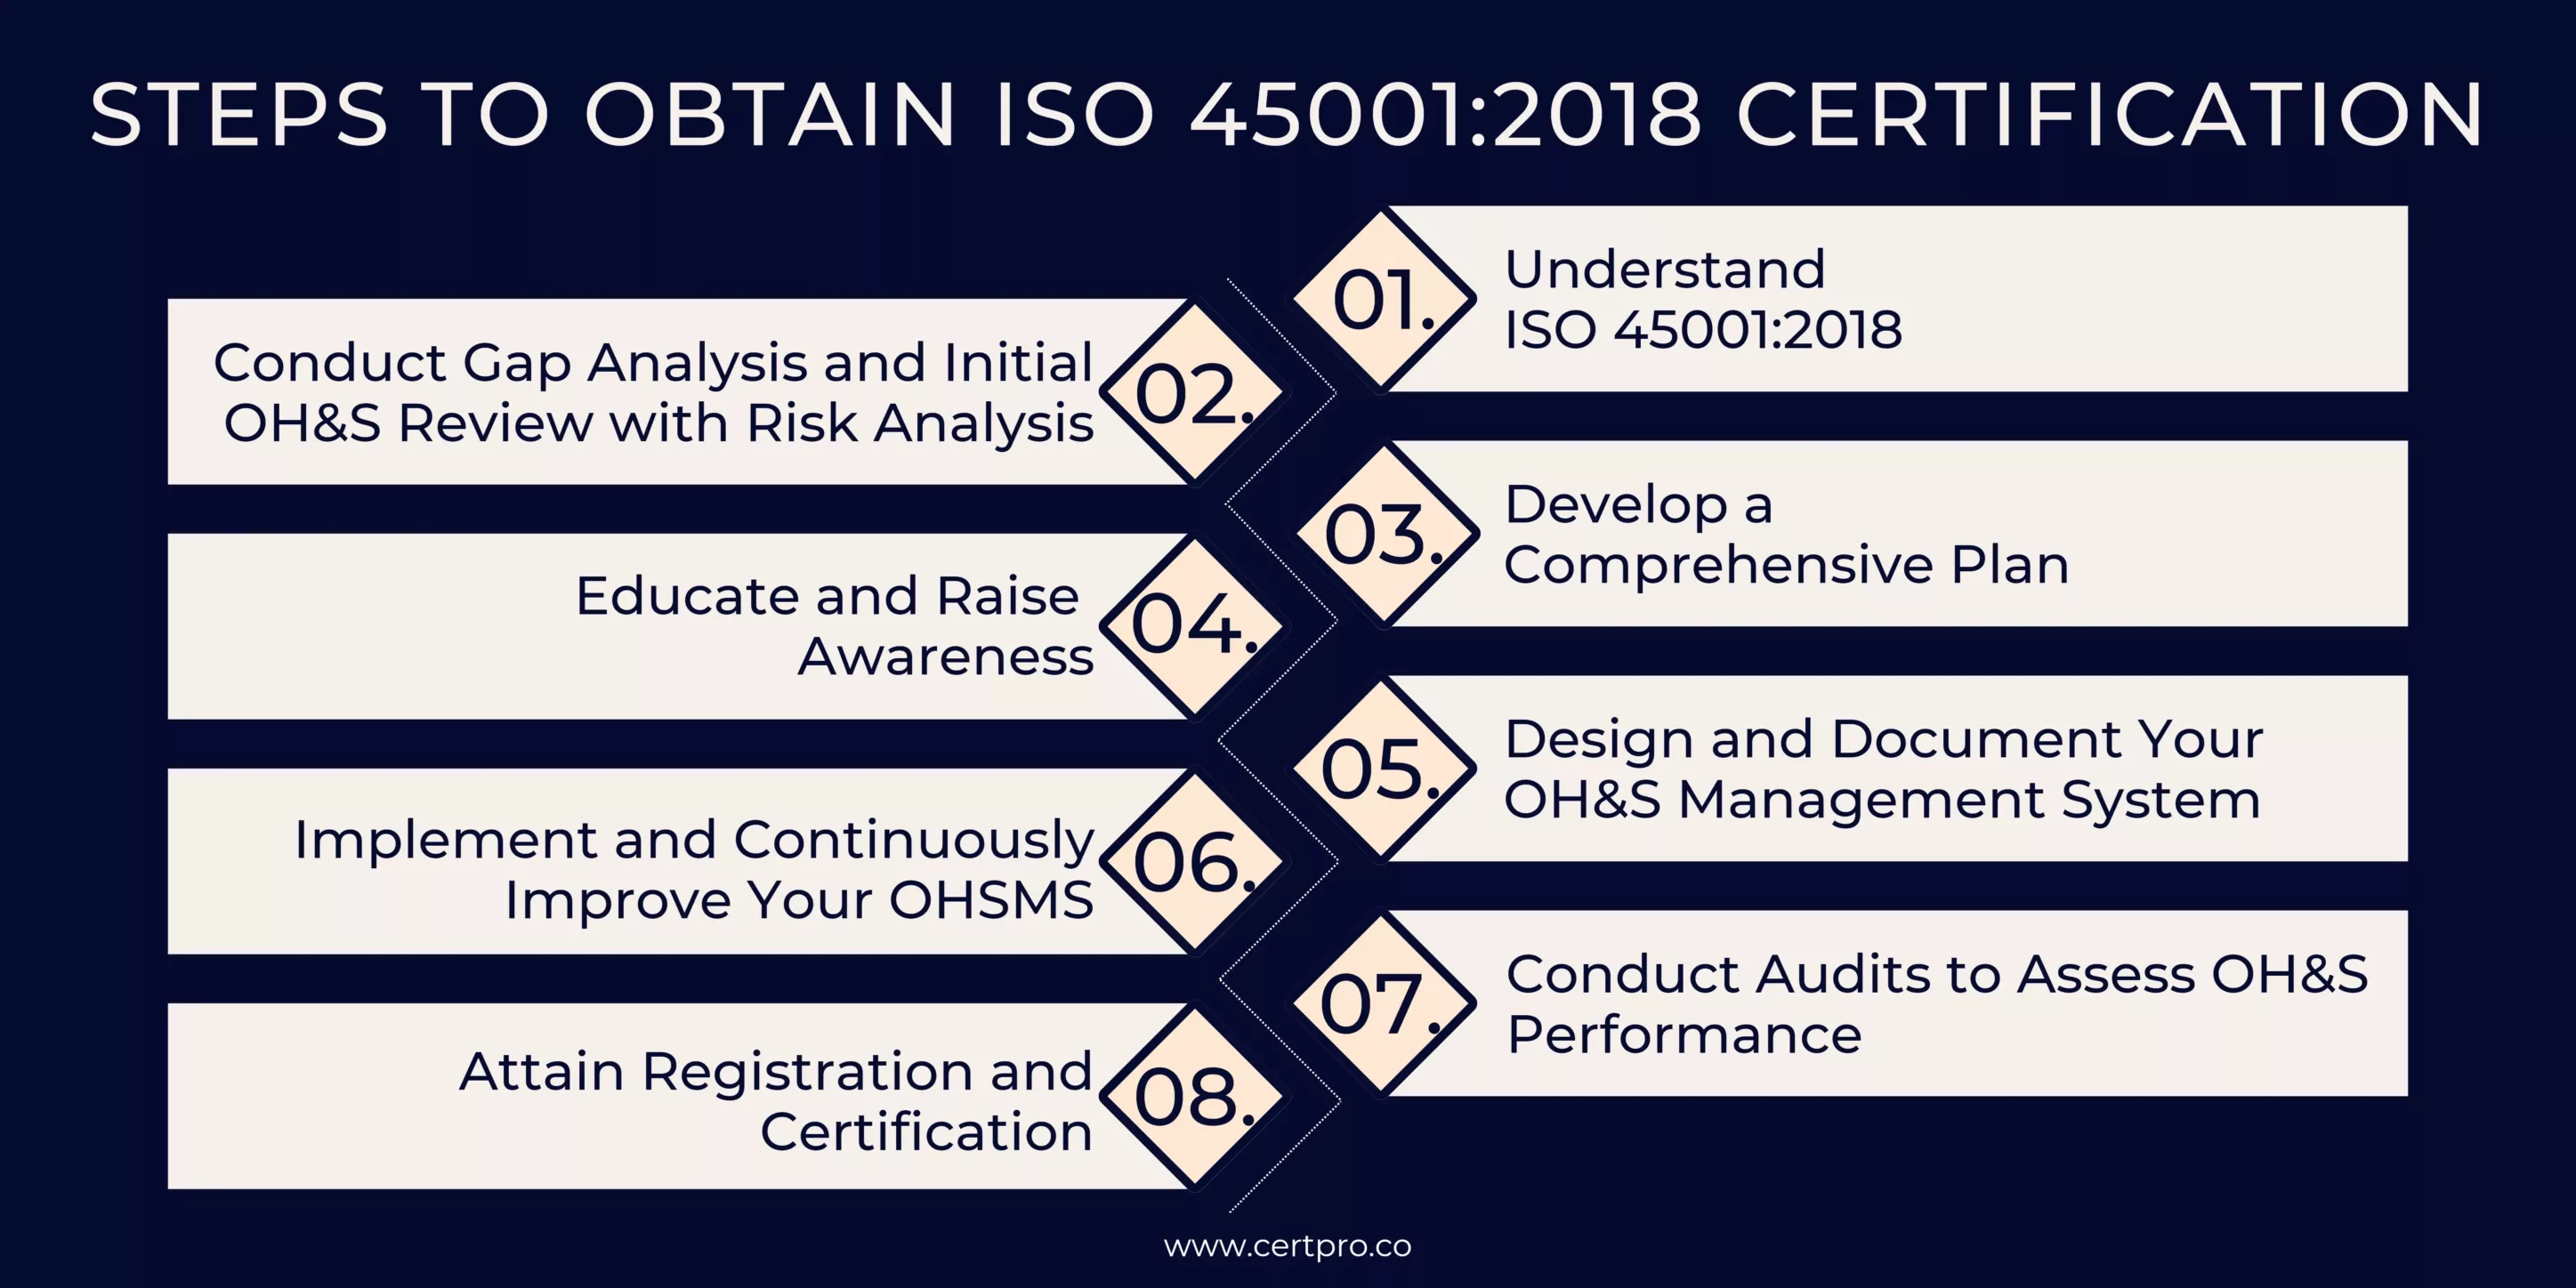 STEPS TO OBTAIN ISO 45001-2018 CERTIFICATION